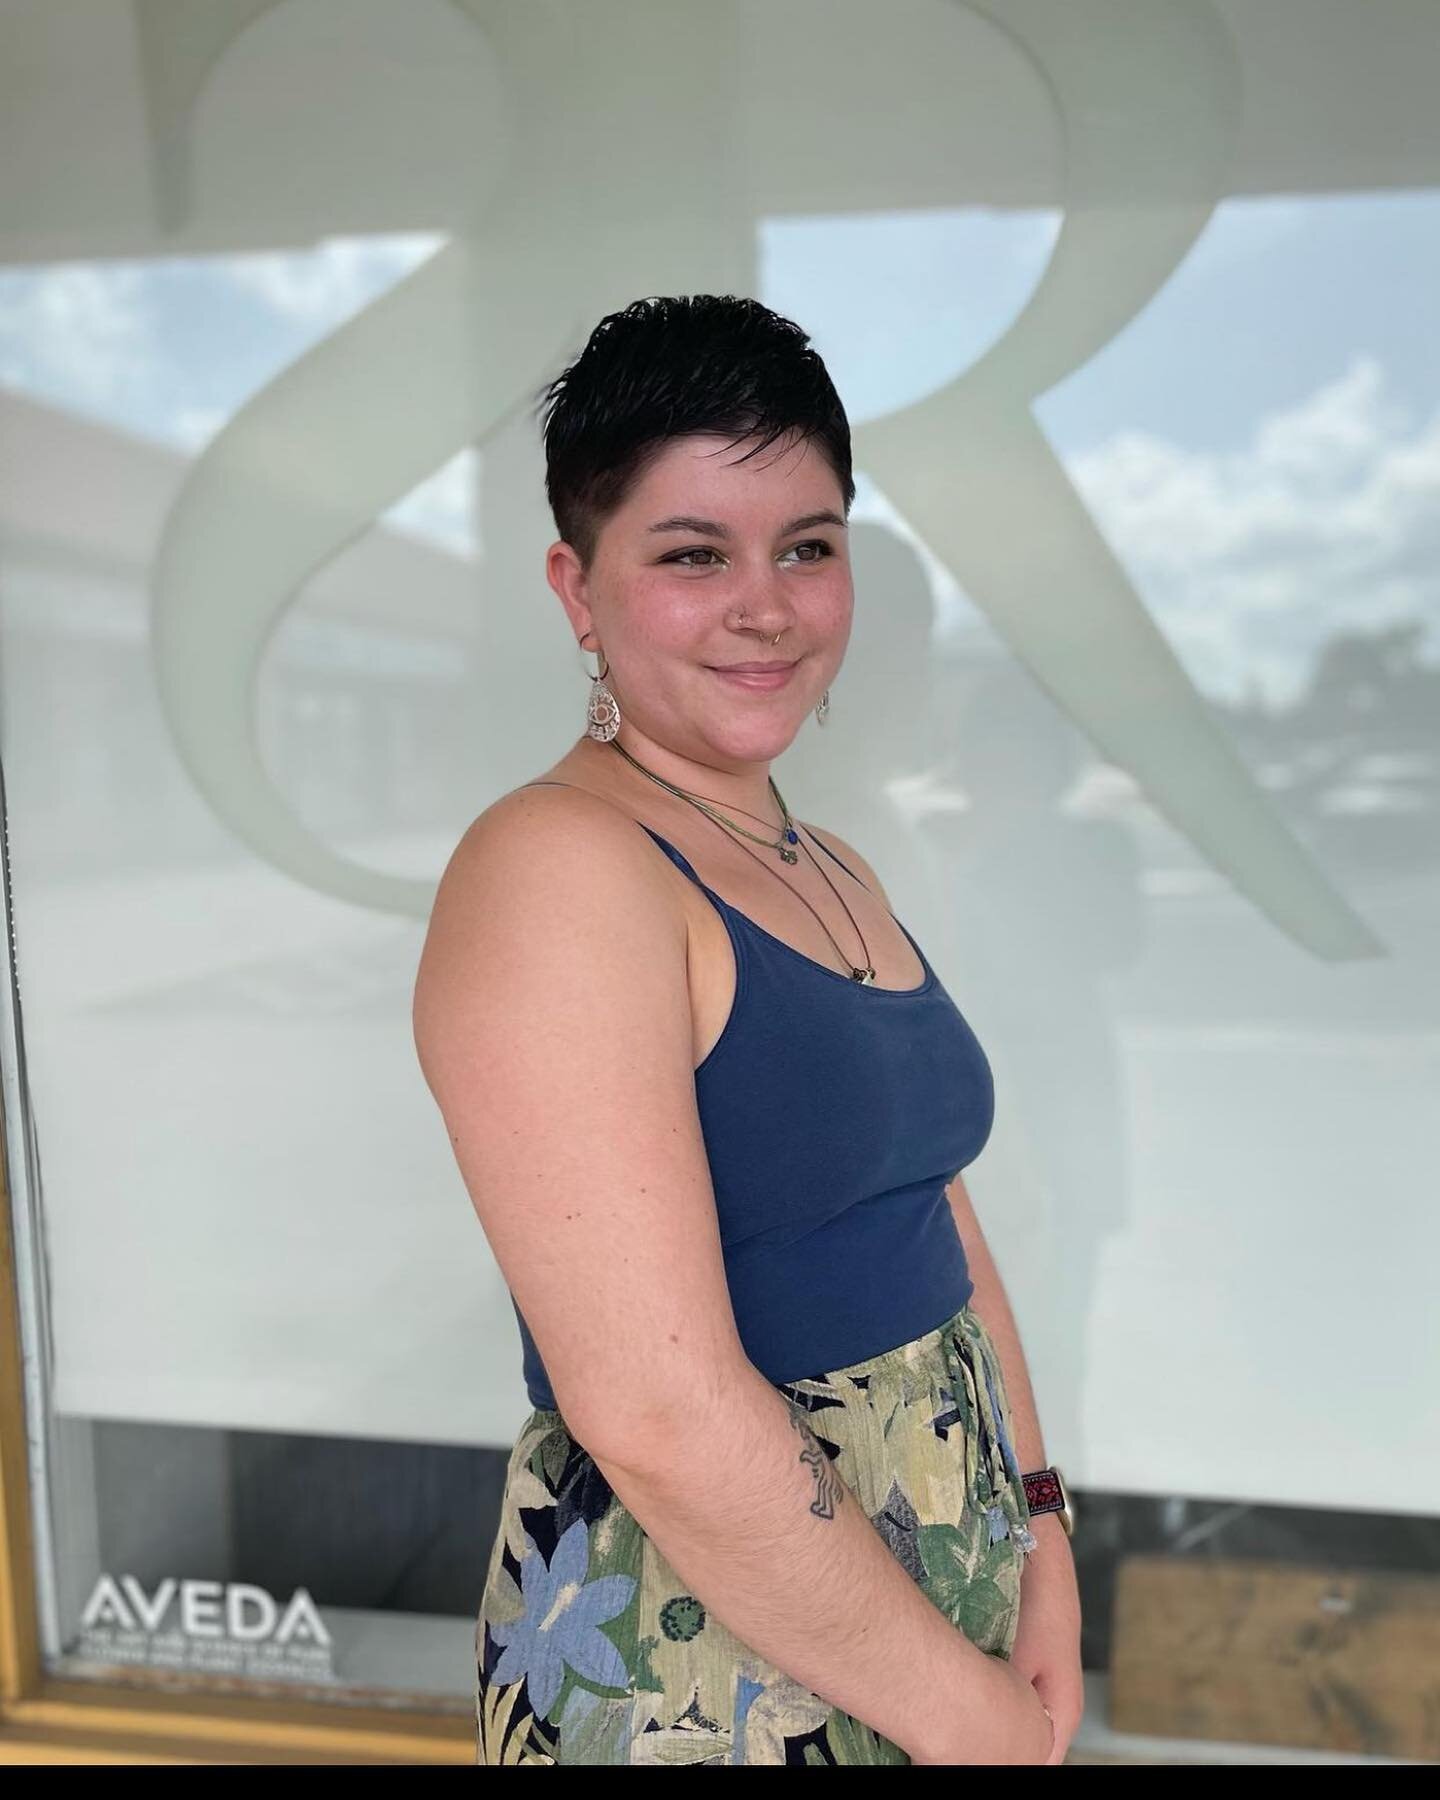 @boxdyebreakup gave this lovely client the perfect #shorthaircut, but her personality is what gave it life! 
#shorthair #hair #haircut #haircutsforwomen #haircutdesigns #hairstyles #hairstyle #hairideas #hairlove #bradenton #sarasota #bradentonhair #